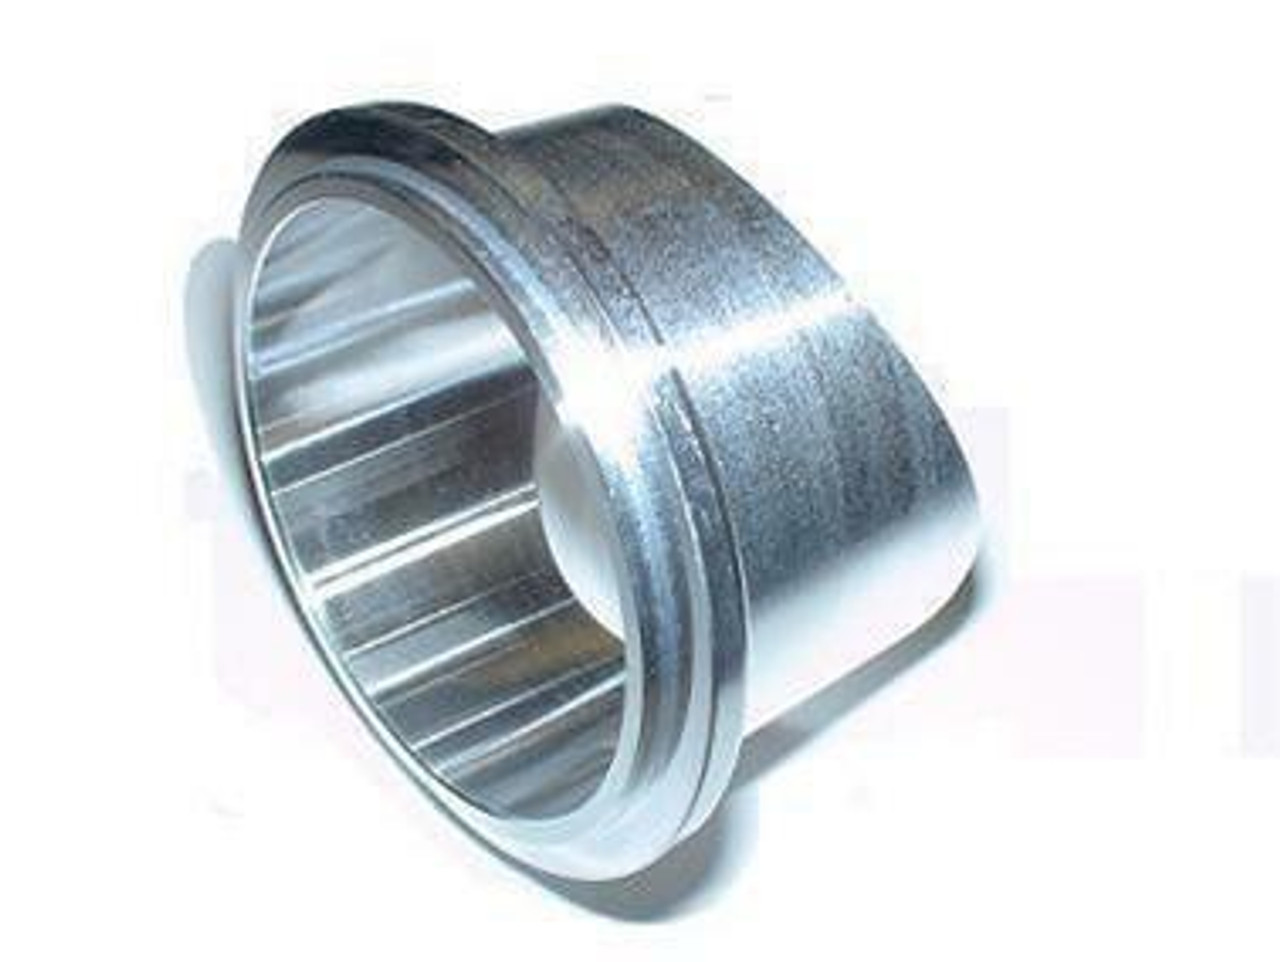 Torque Solution Tial 50mm, Q & Q-R Blow Off Valve Flange - Stainless Steel